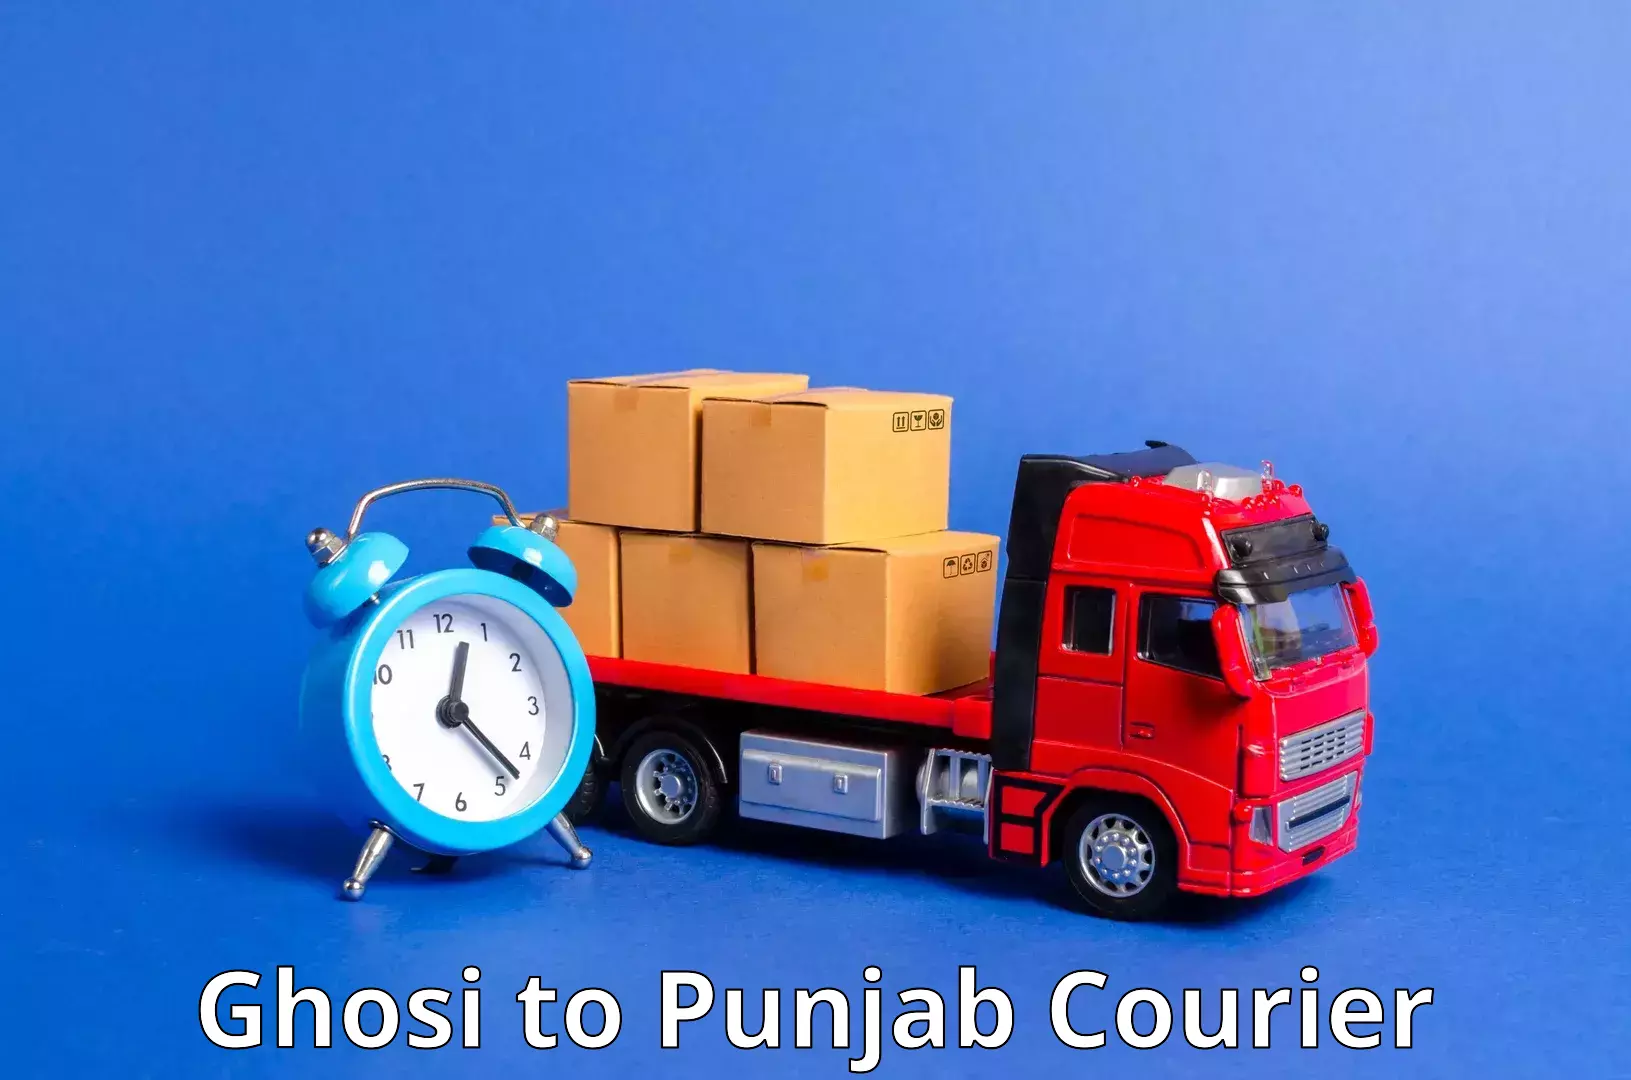 Professional courier handling Ghosi to Mohali